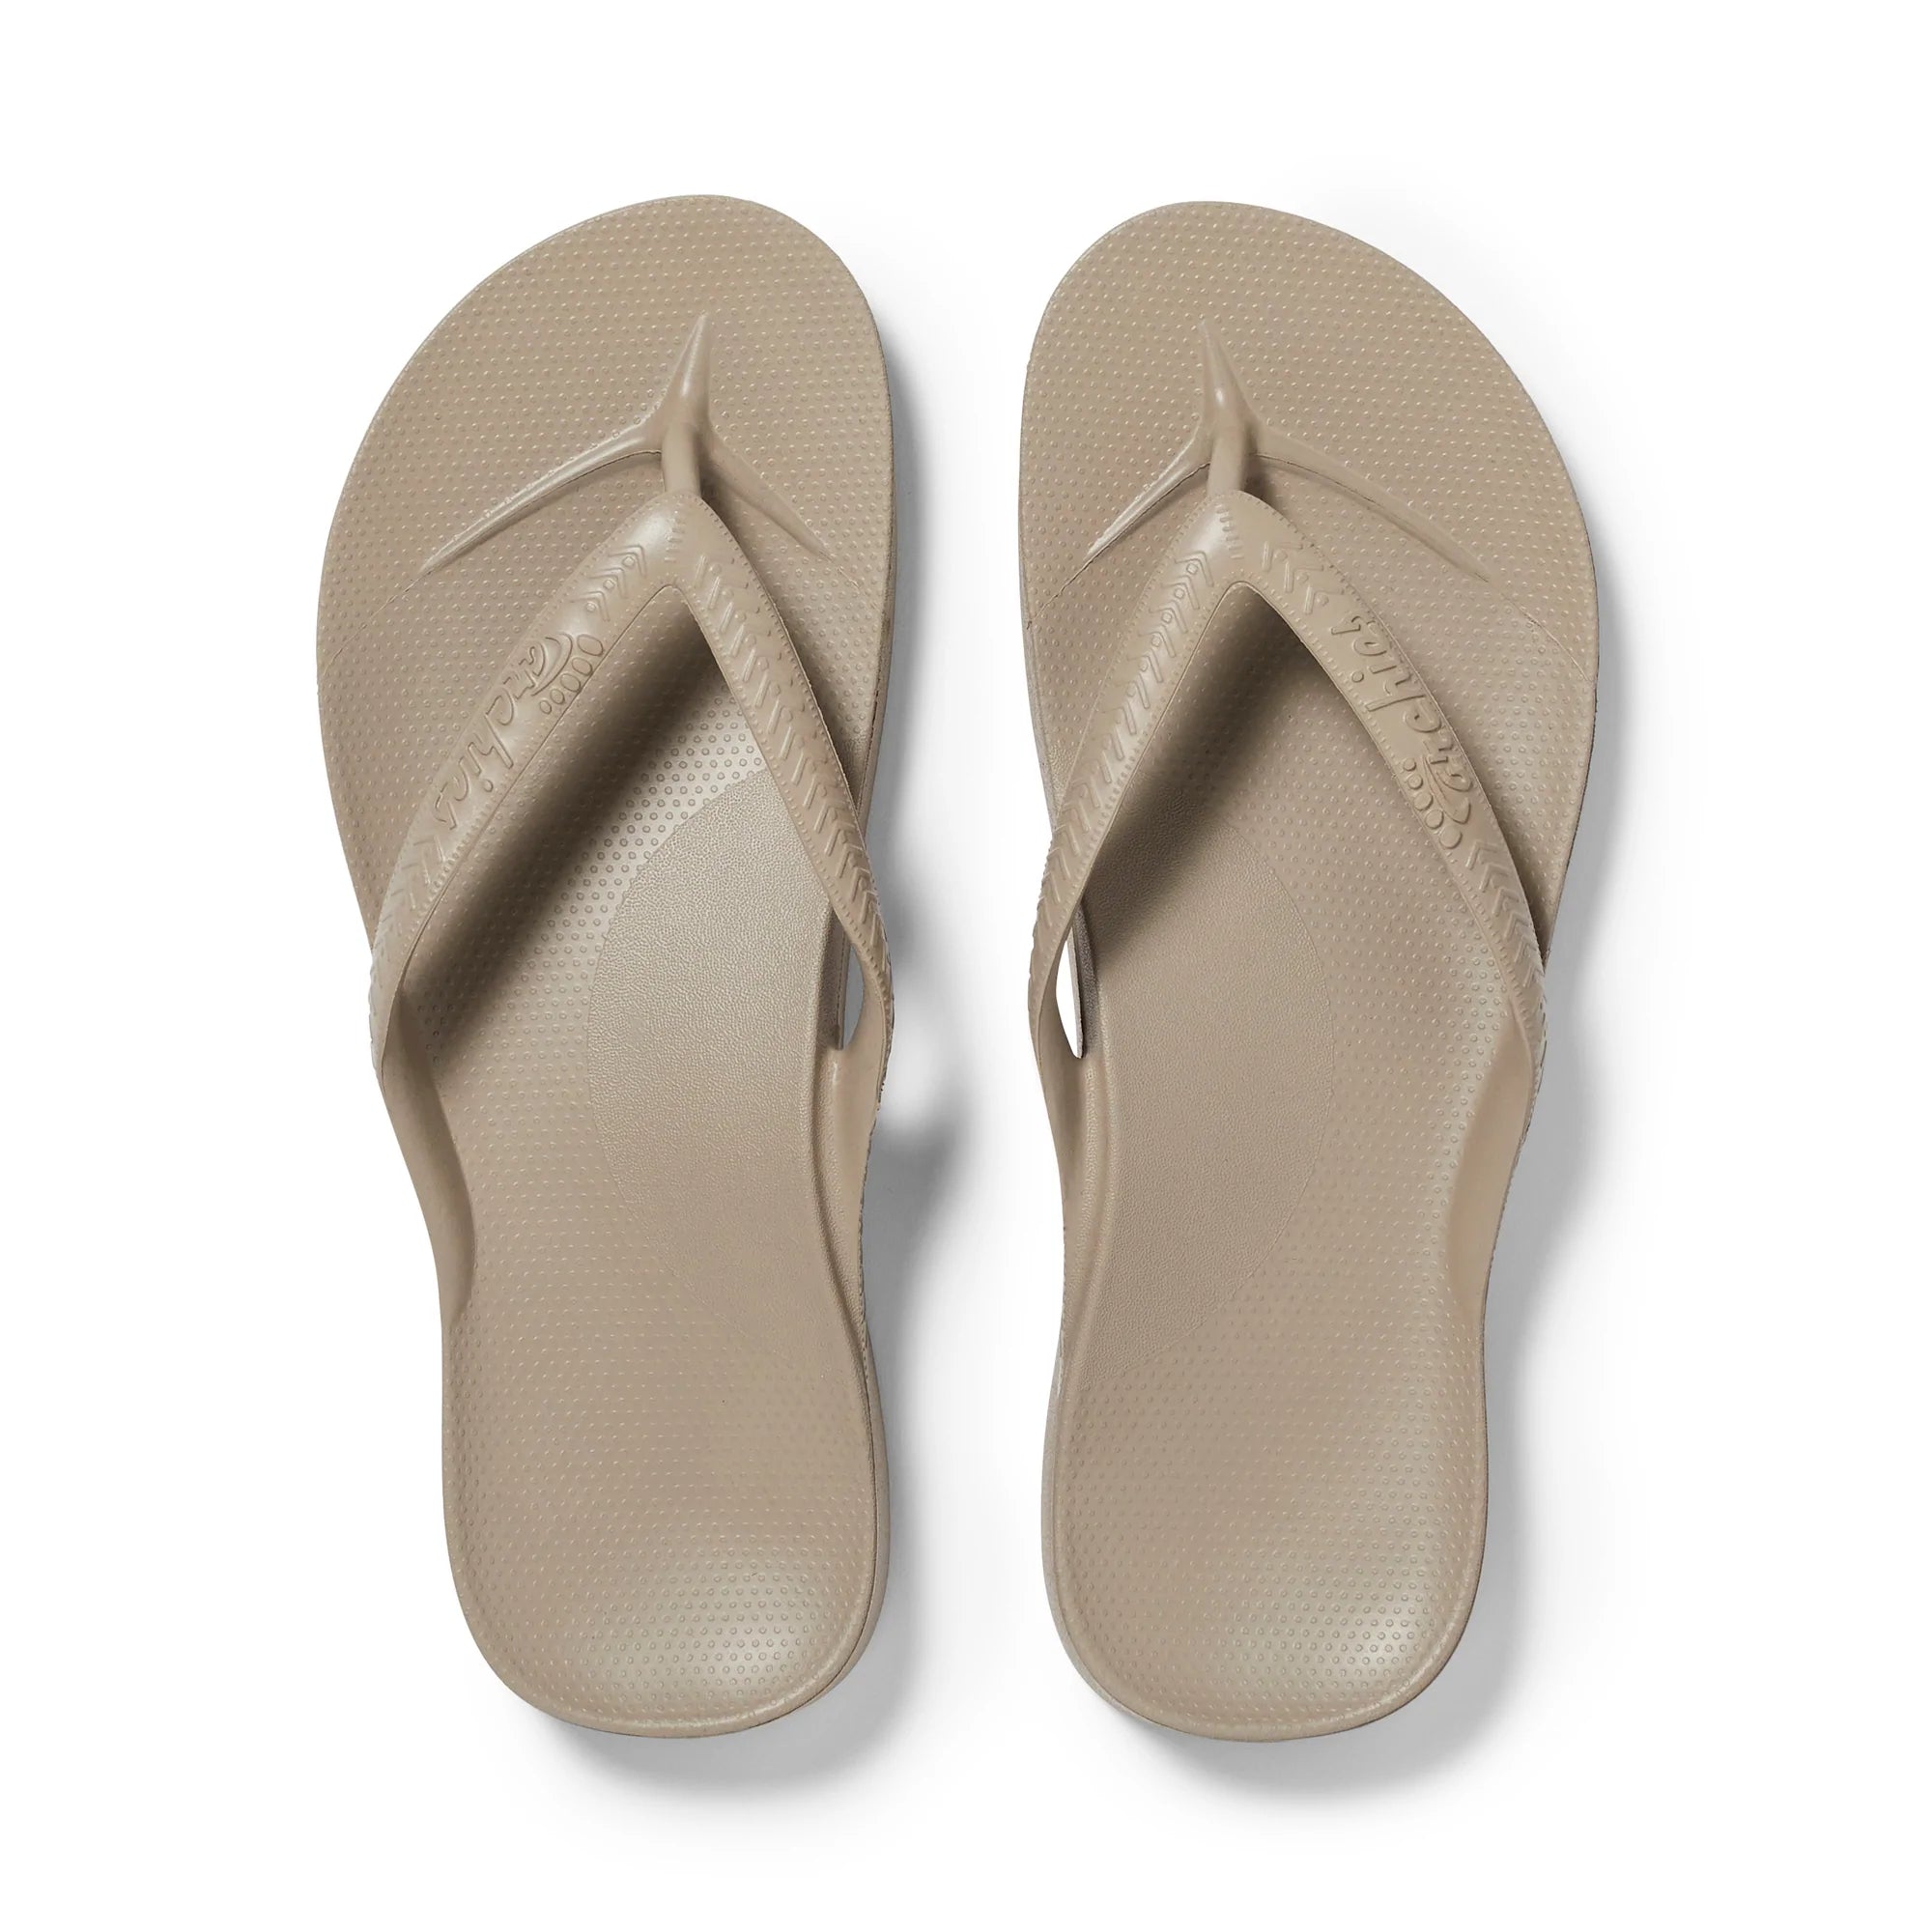 Archie’s Taupe - Arch support janda